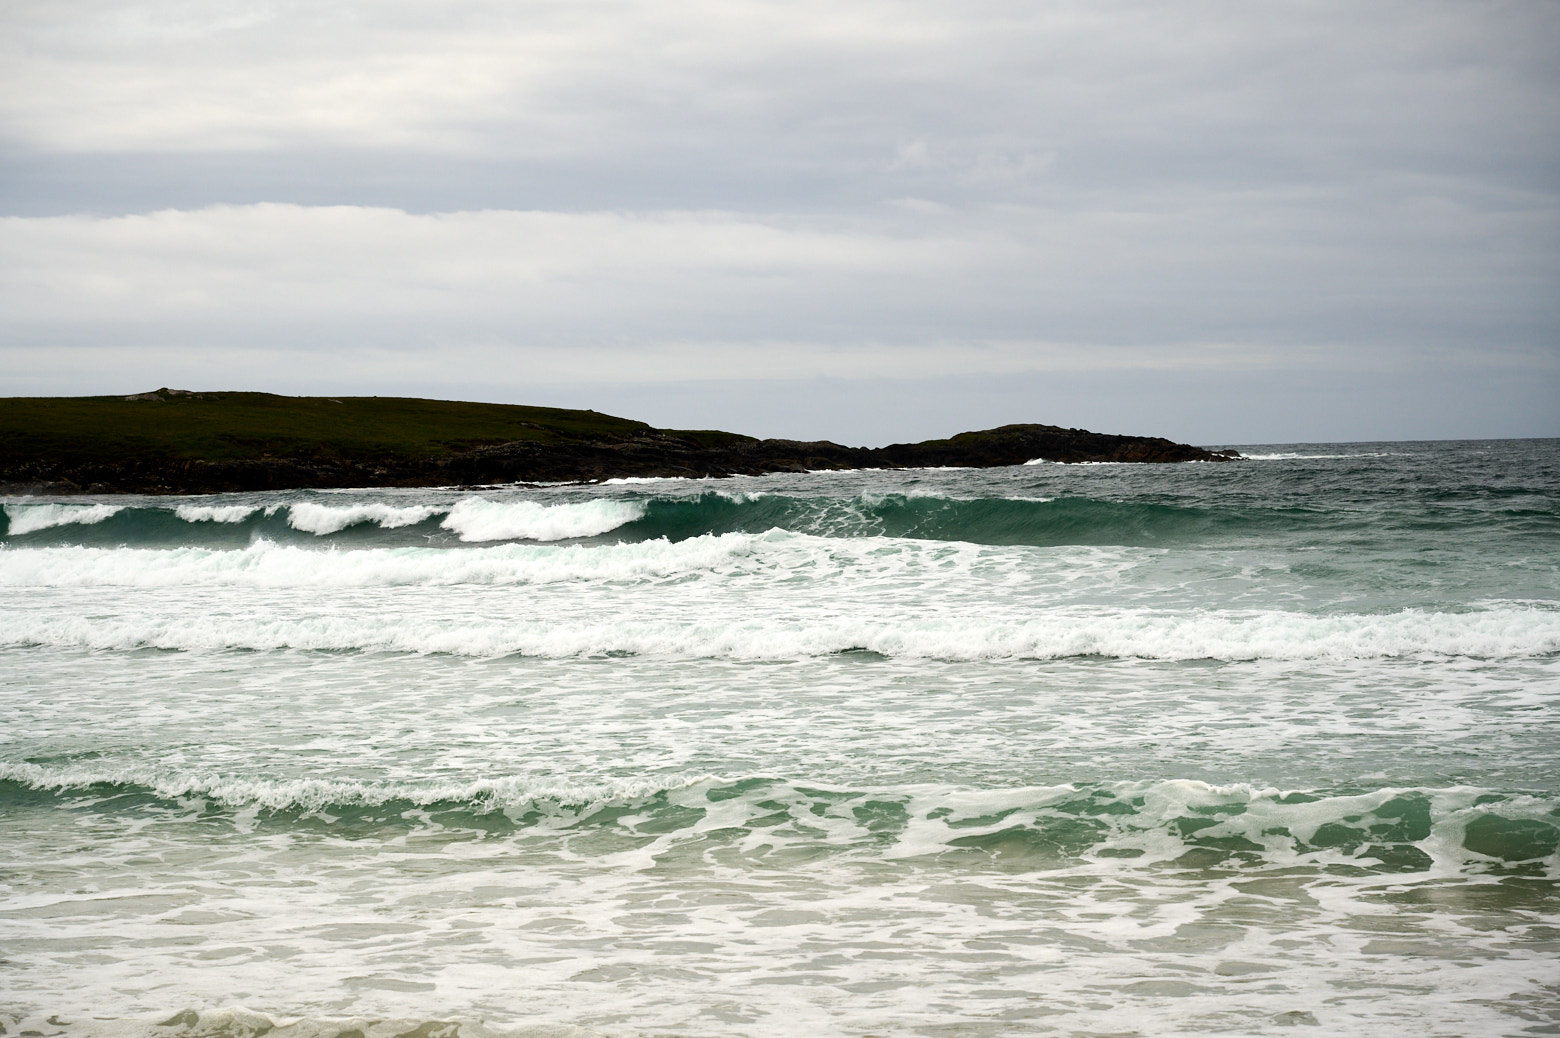 Traigh stir in North Uist and a view of St Kilda, Outer Hebrides.